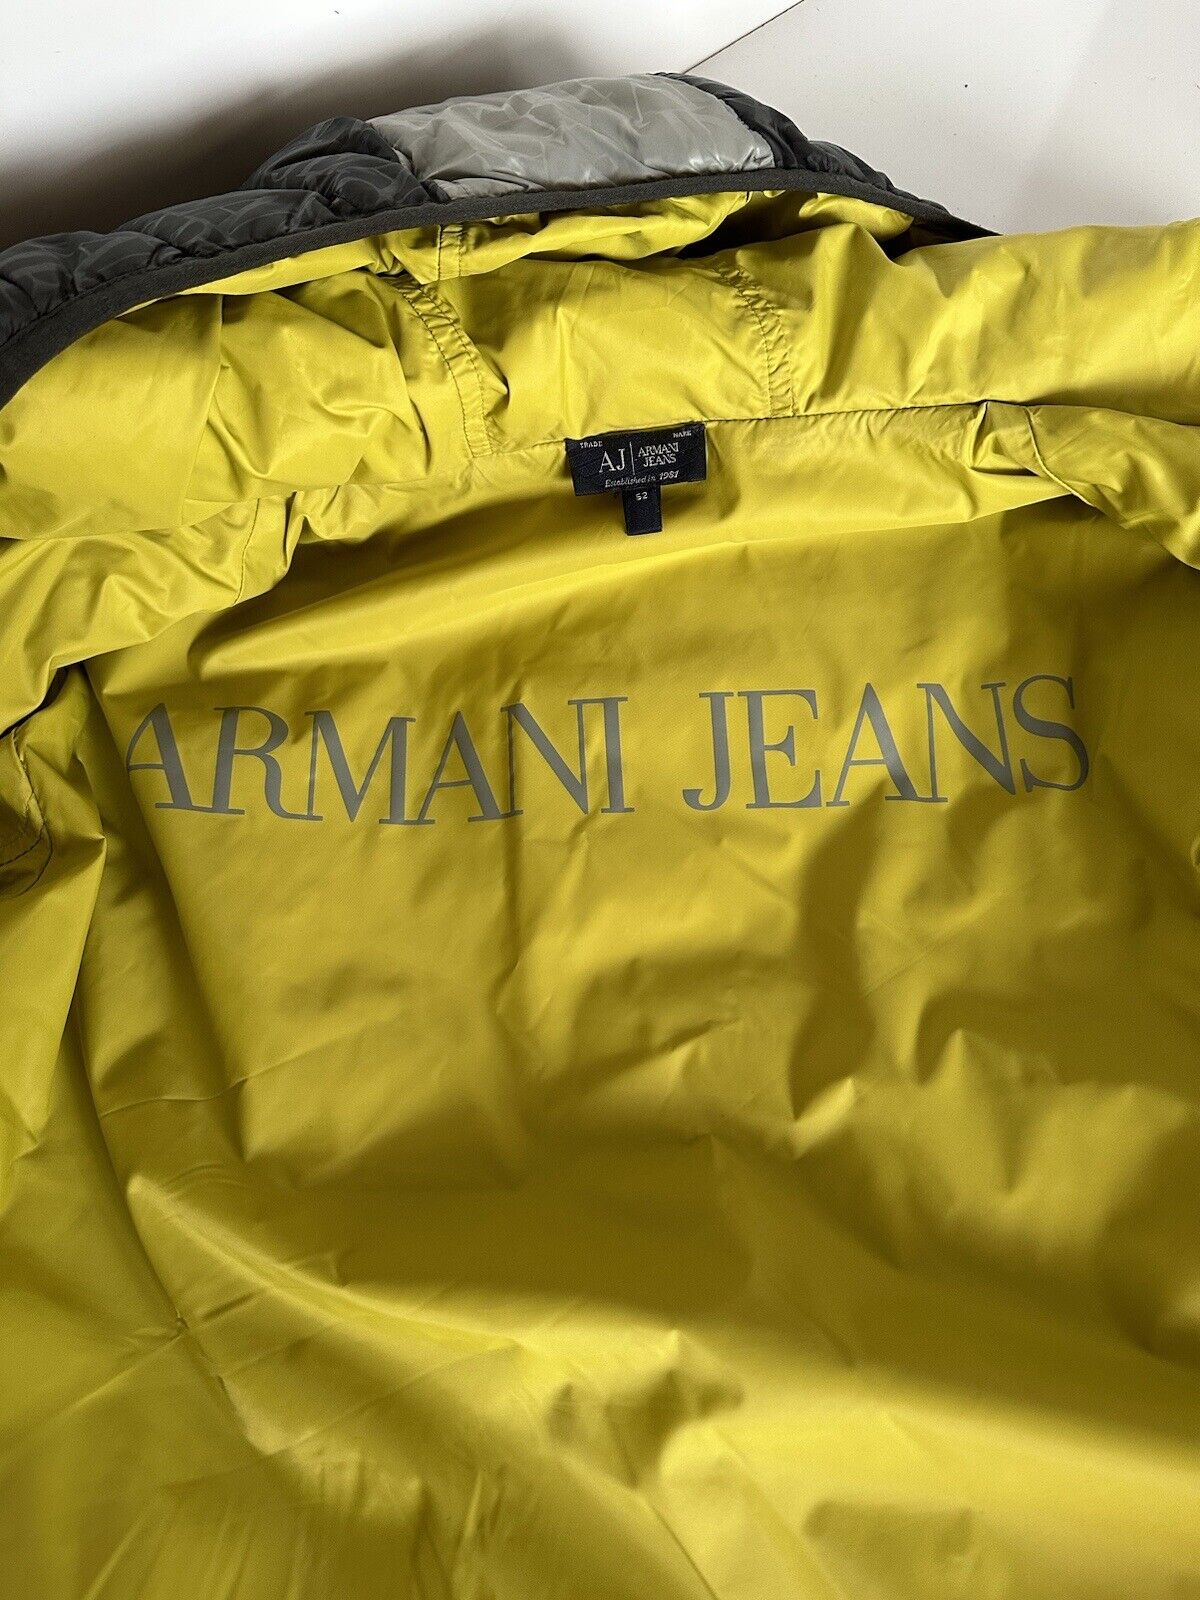 Armani Jeans 2 Sided Reversible Grey/Yellow Puff Jacket with Hoodie Large (52)